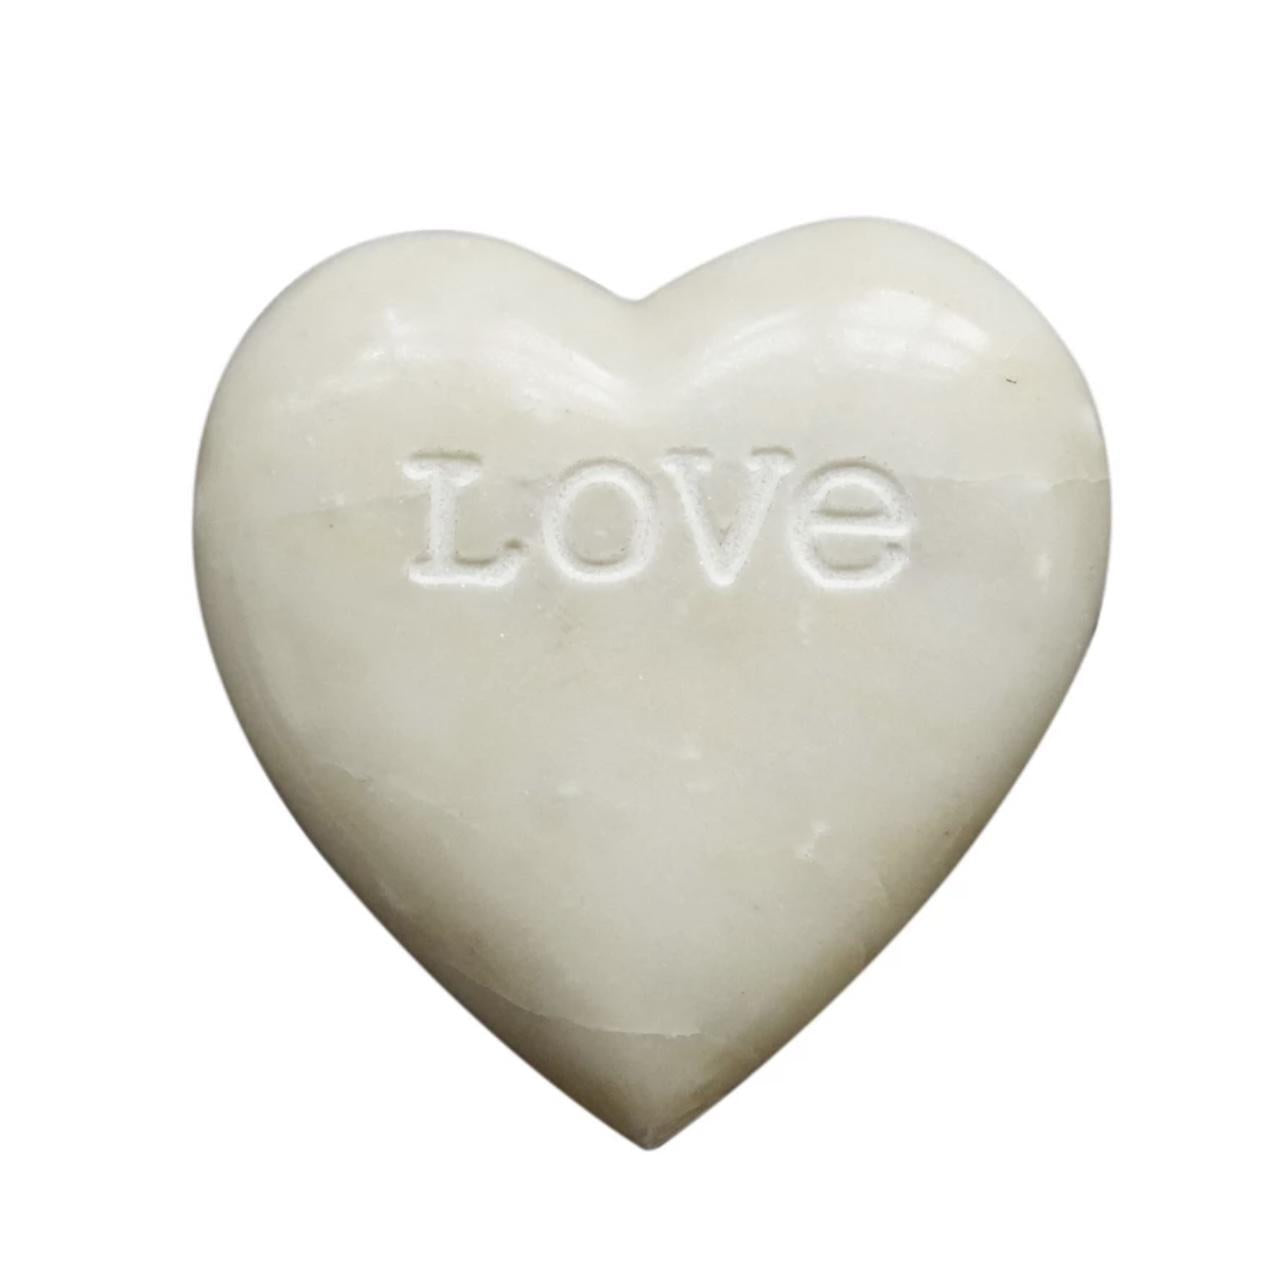 Soapstone Heart with Engraved "Love"